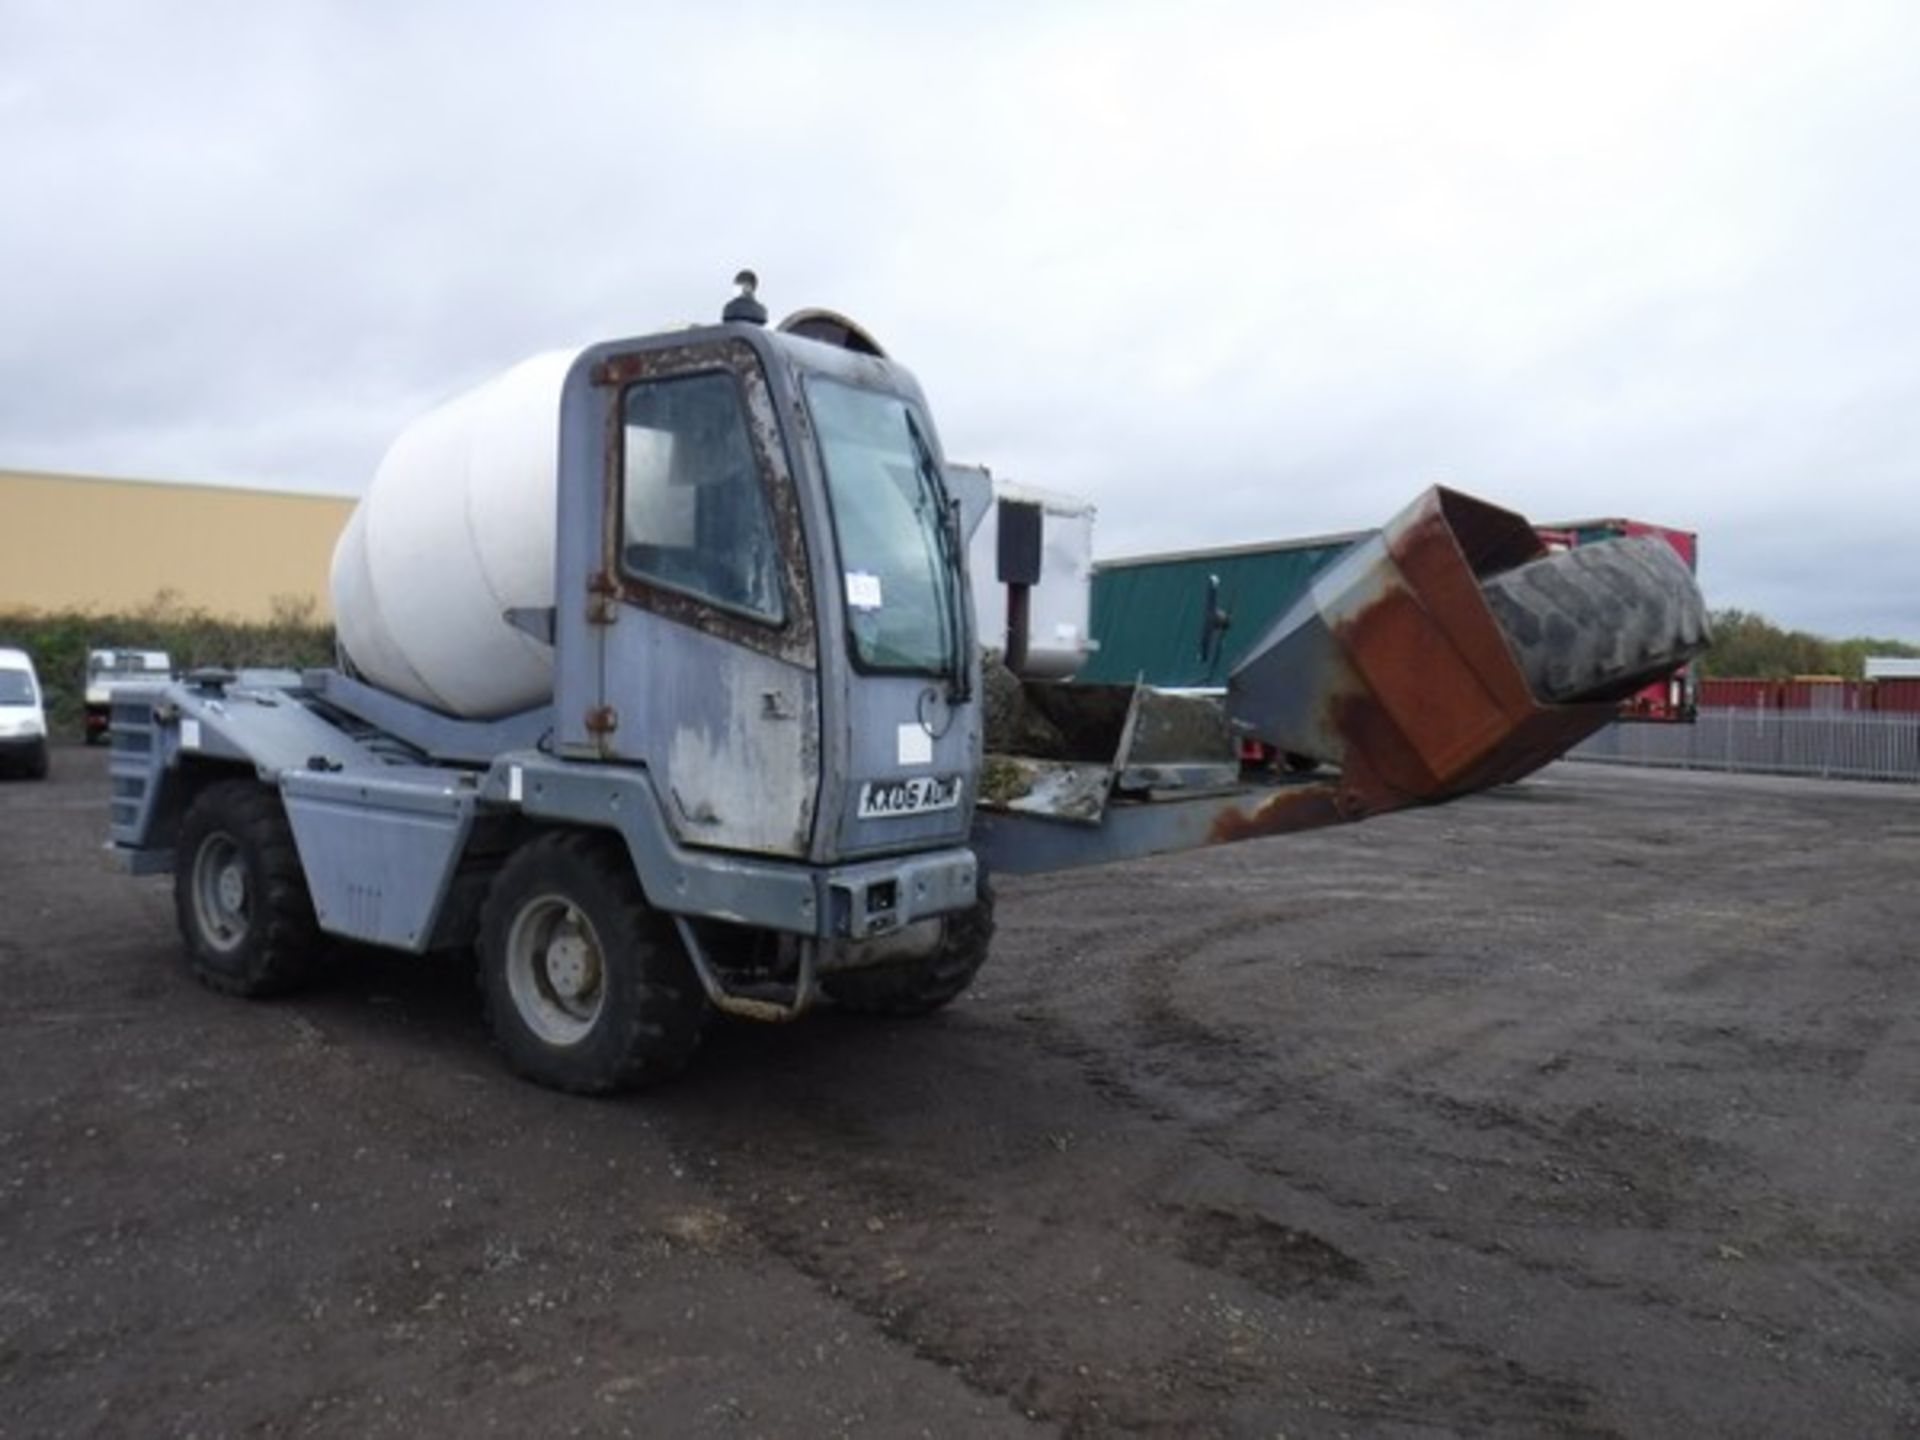 2003 HYDRO MIX 35G rough terrain concrete mixer (3.5 cu.m) 4 x 4 wheel driven with a free standing c - Image 3 of 18